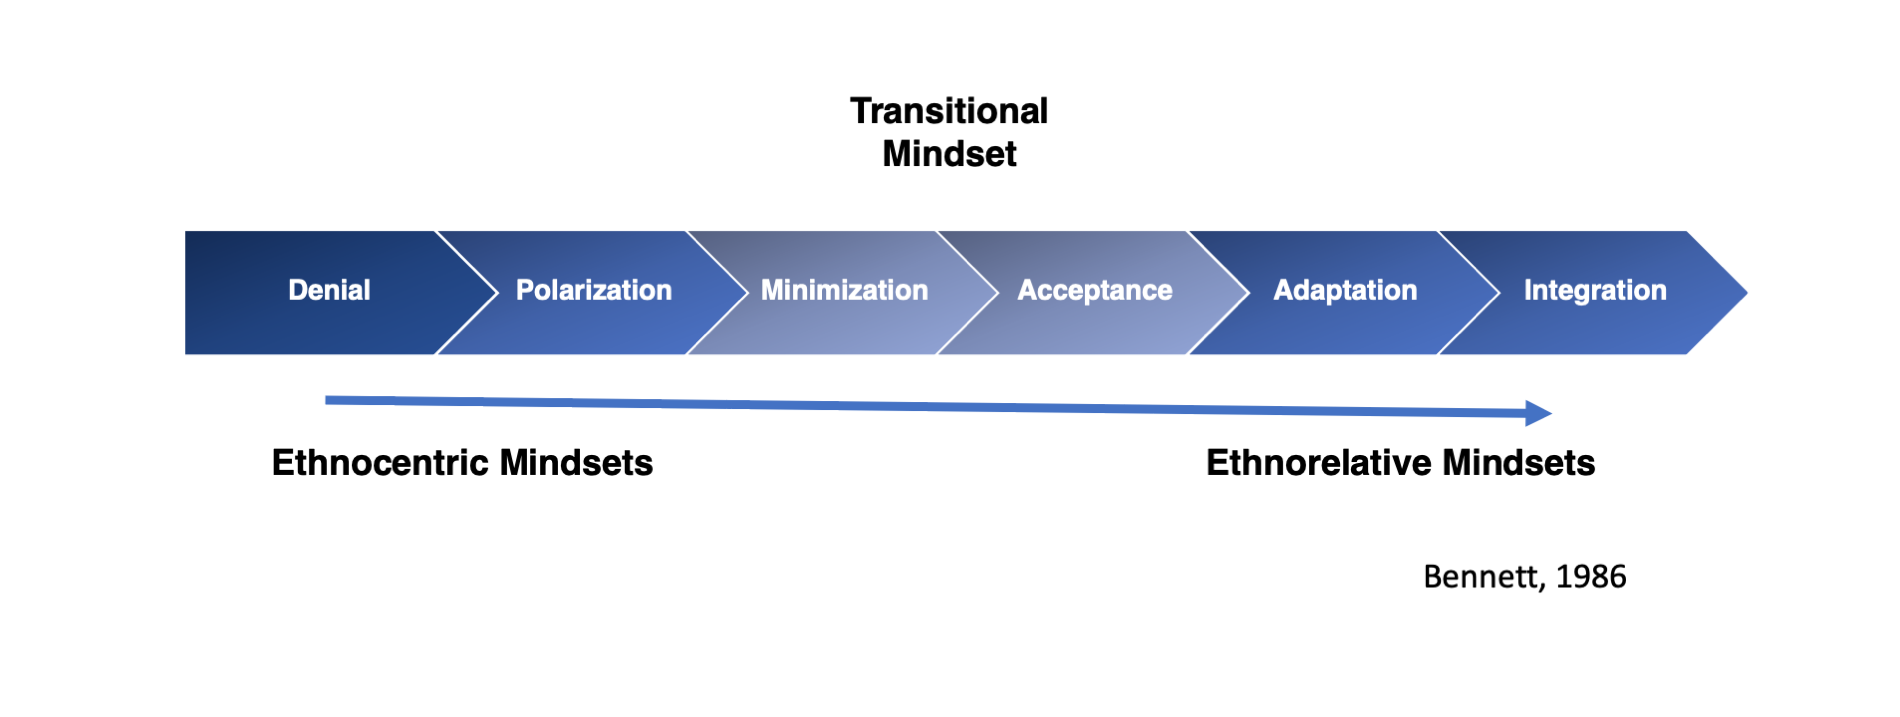 The Developmental model of intercultural sensitivity begins with two ethnocentric mindsets: Denial and polarization. It then moves to the transitional mindset of minimization. Then, the model moves towards the three ethnorelative mindsets of acceptance, adaptation, and integration.